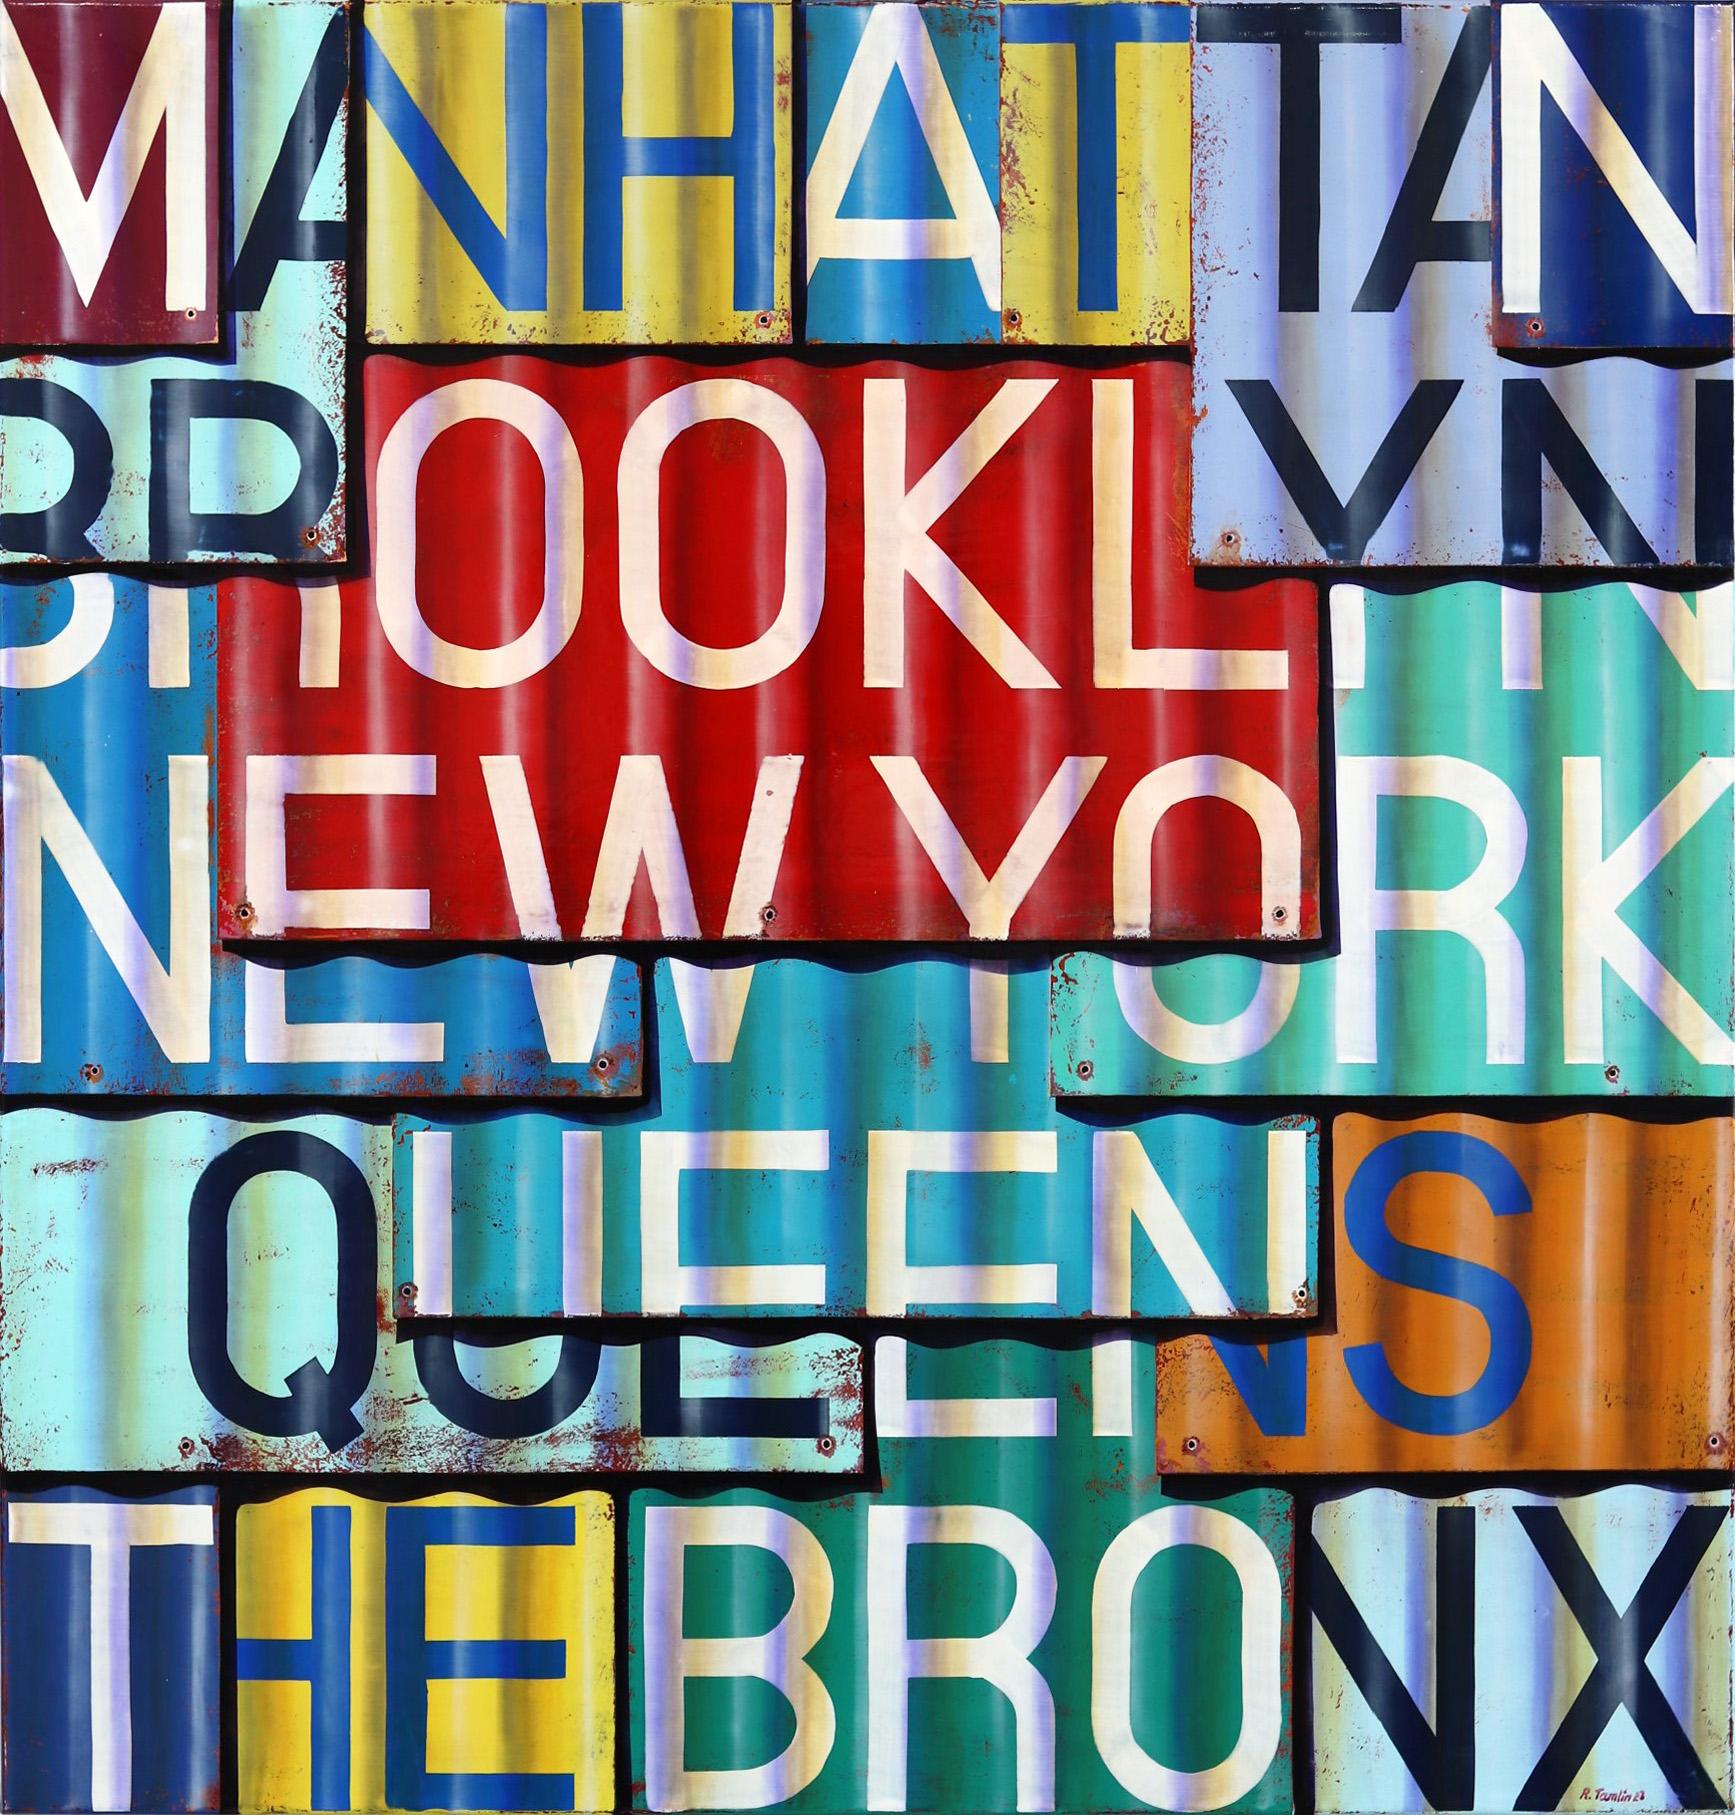 Ross Tamlin Interior Painting - New York - Photorealistic Sign Painting with Oil and Enamel on Canvas